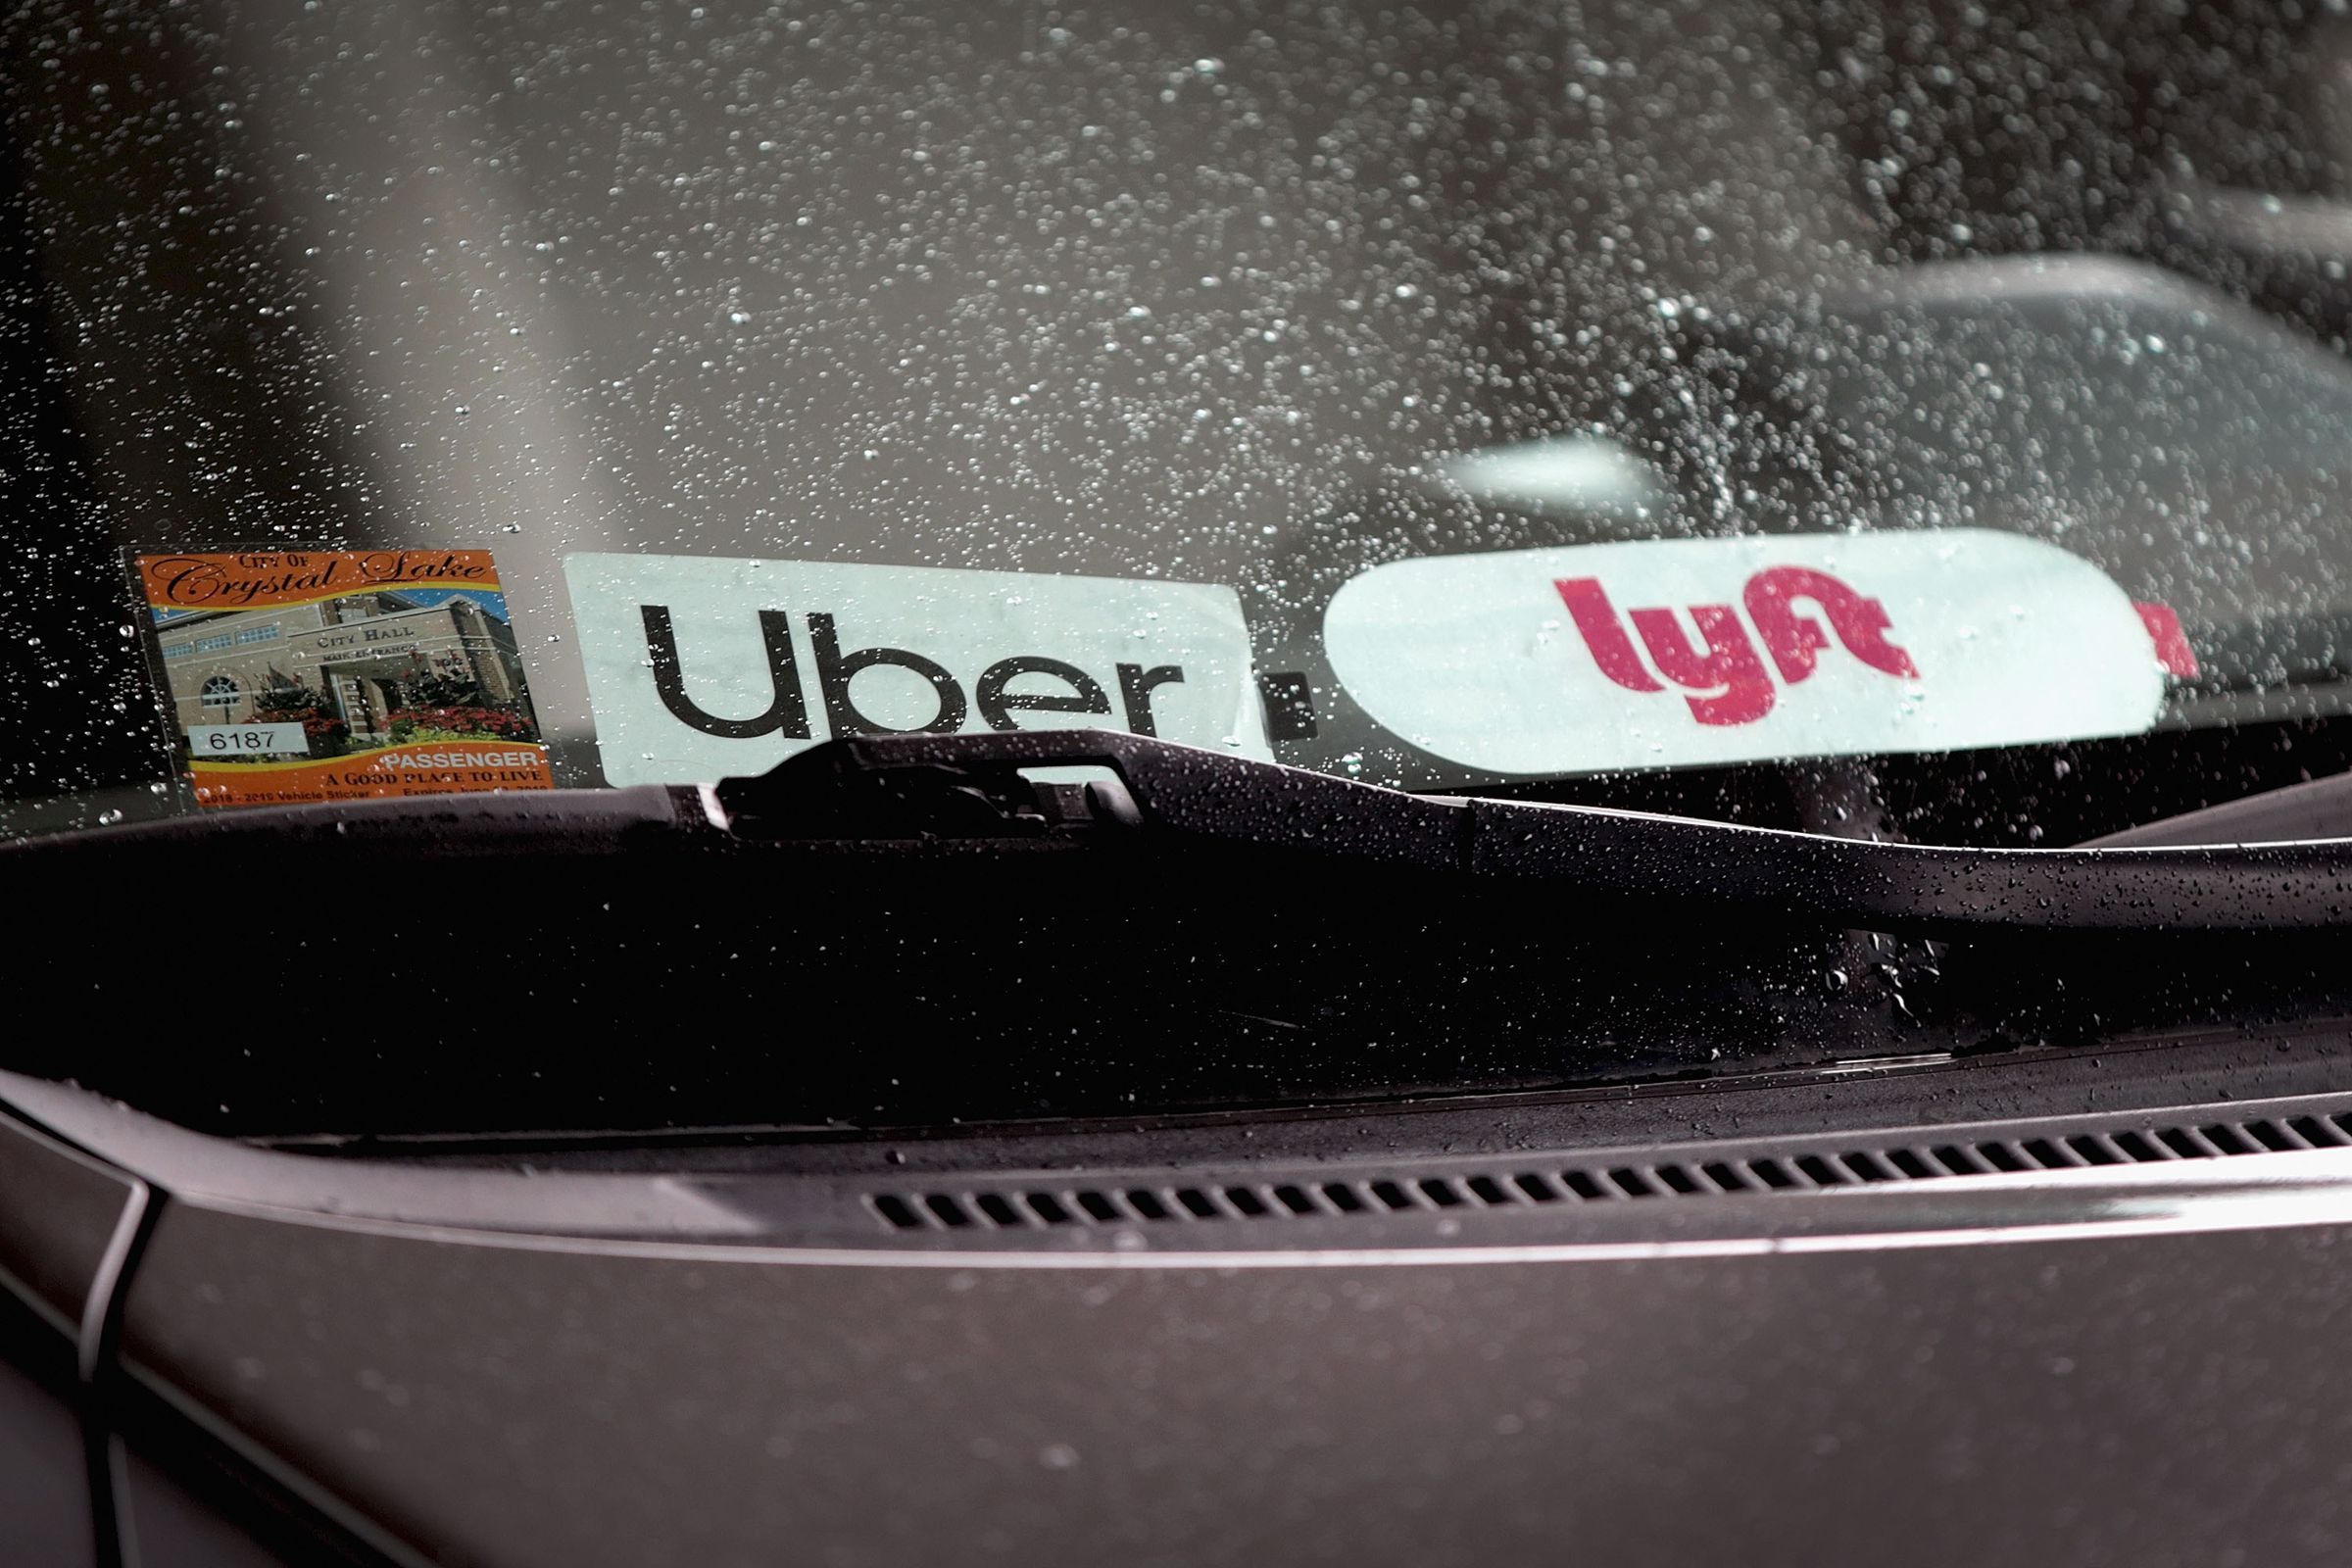 Uber Pushes Back On State Law Requiring Ride Sharing Vehicles To Have Illuminated Signs